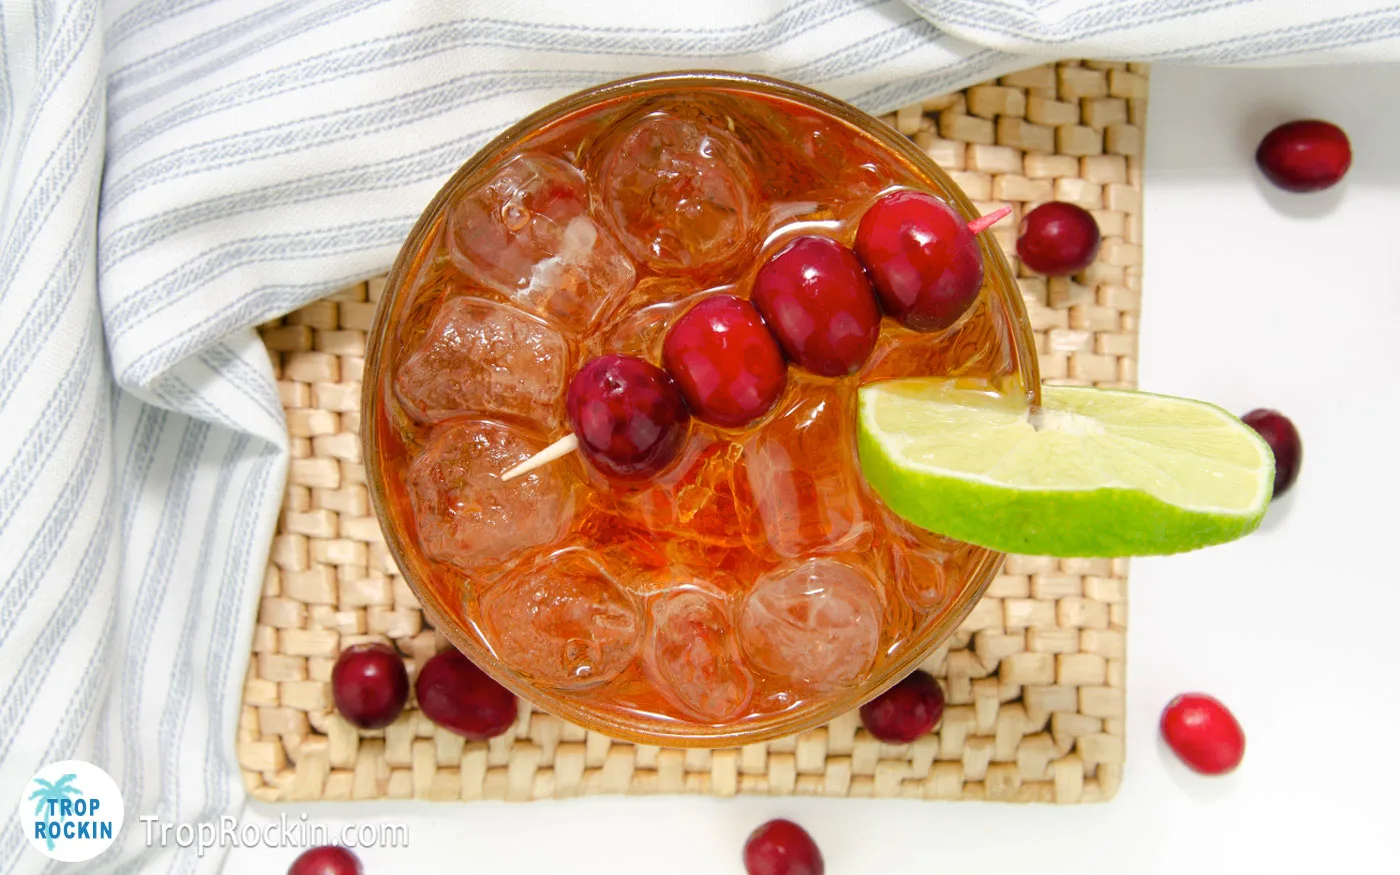 Top view of a Crown and Cranberry drink with skewer of cranberries and a lime wheel on side of the glass for garnish.